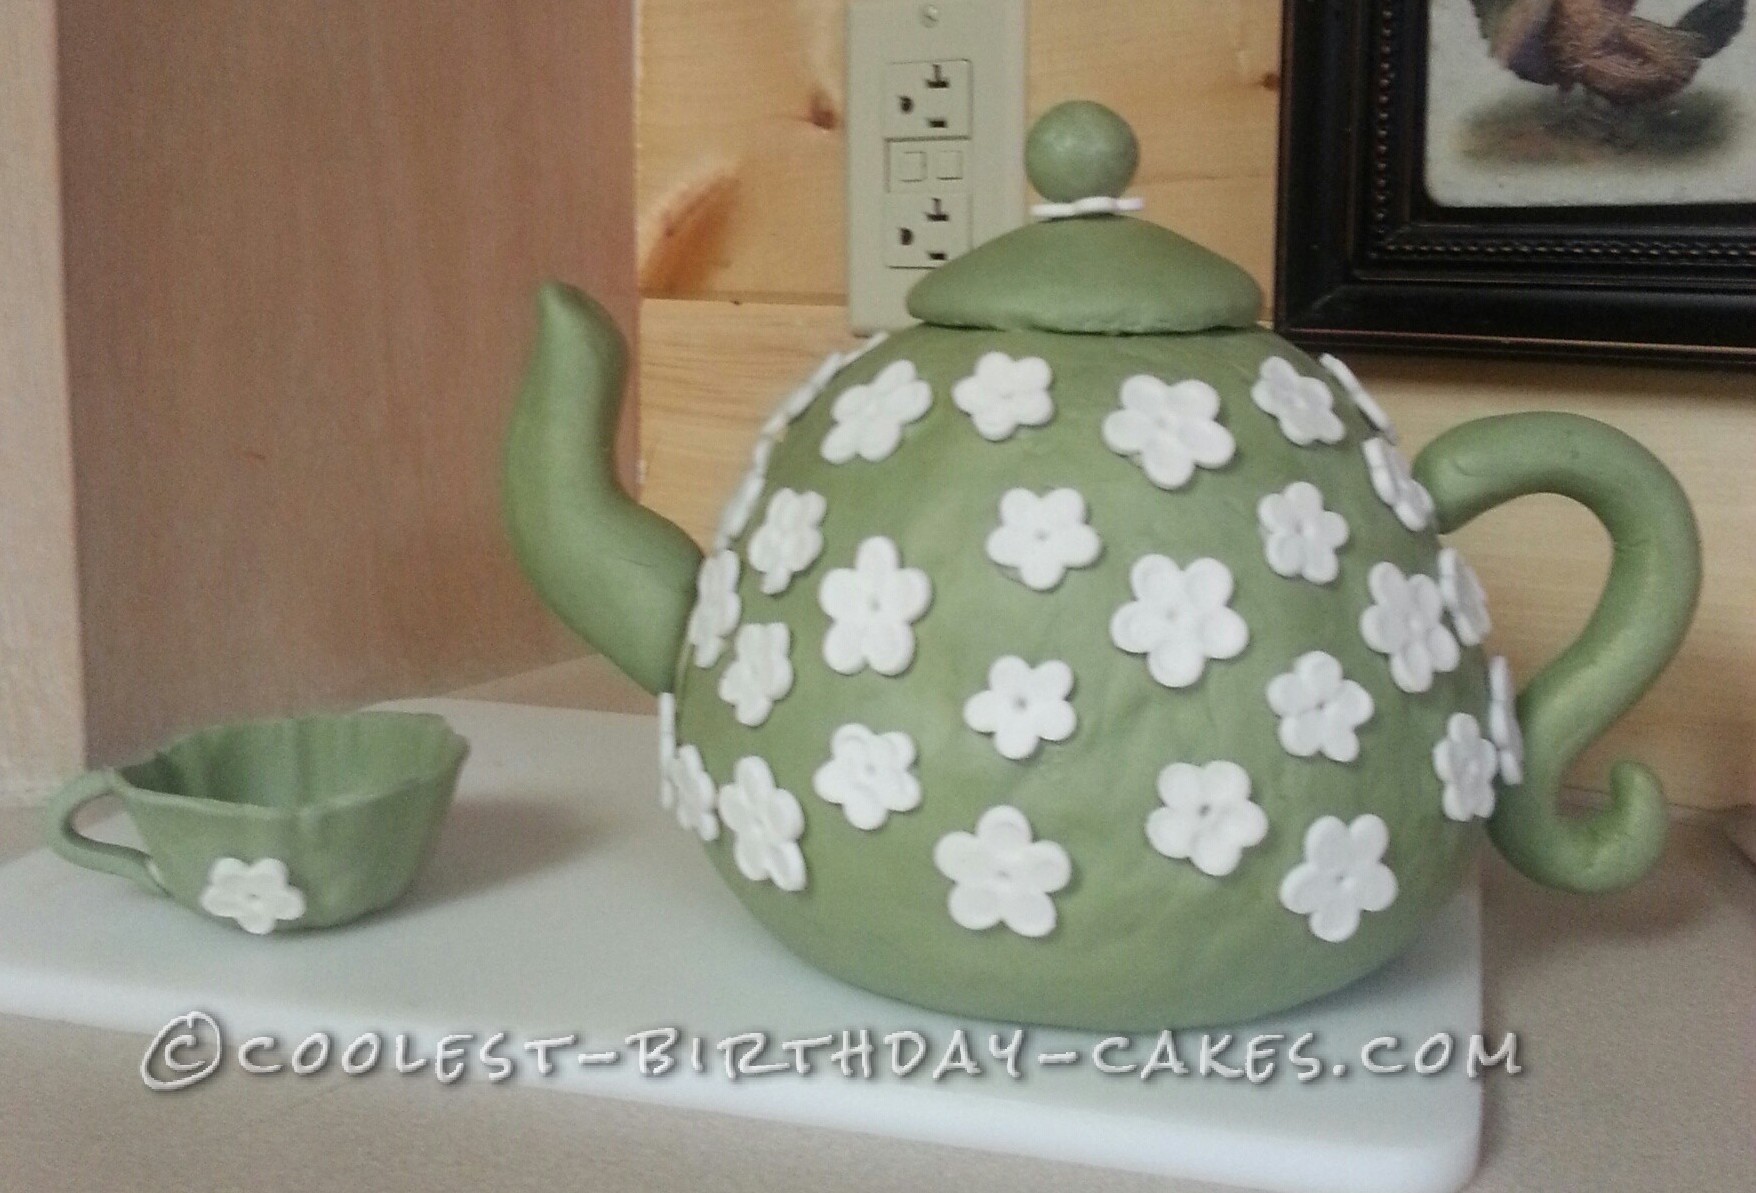 Teapot Cake and Cups for 24 Housewarming Party Guests